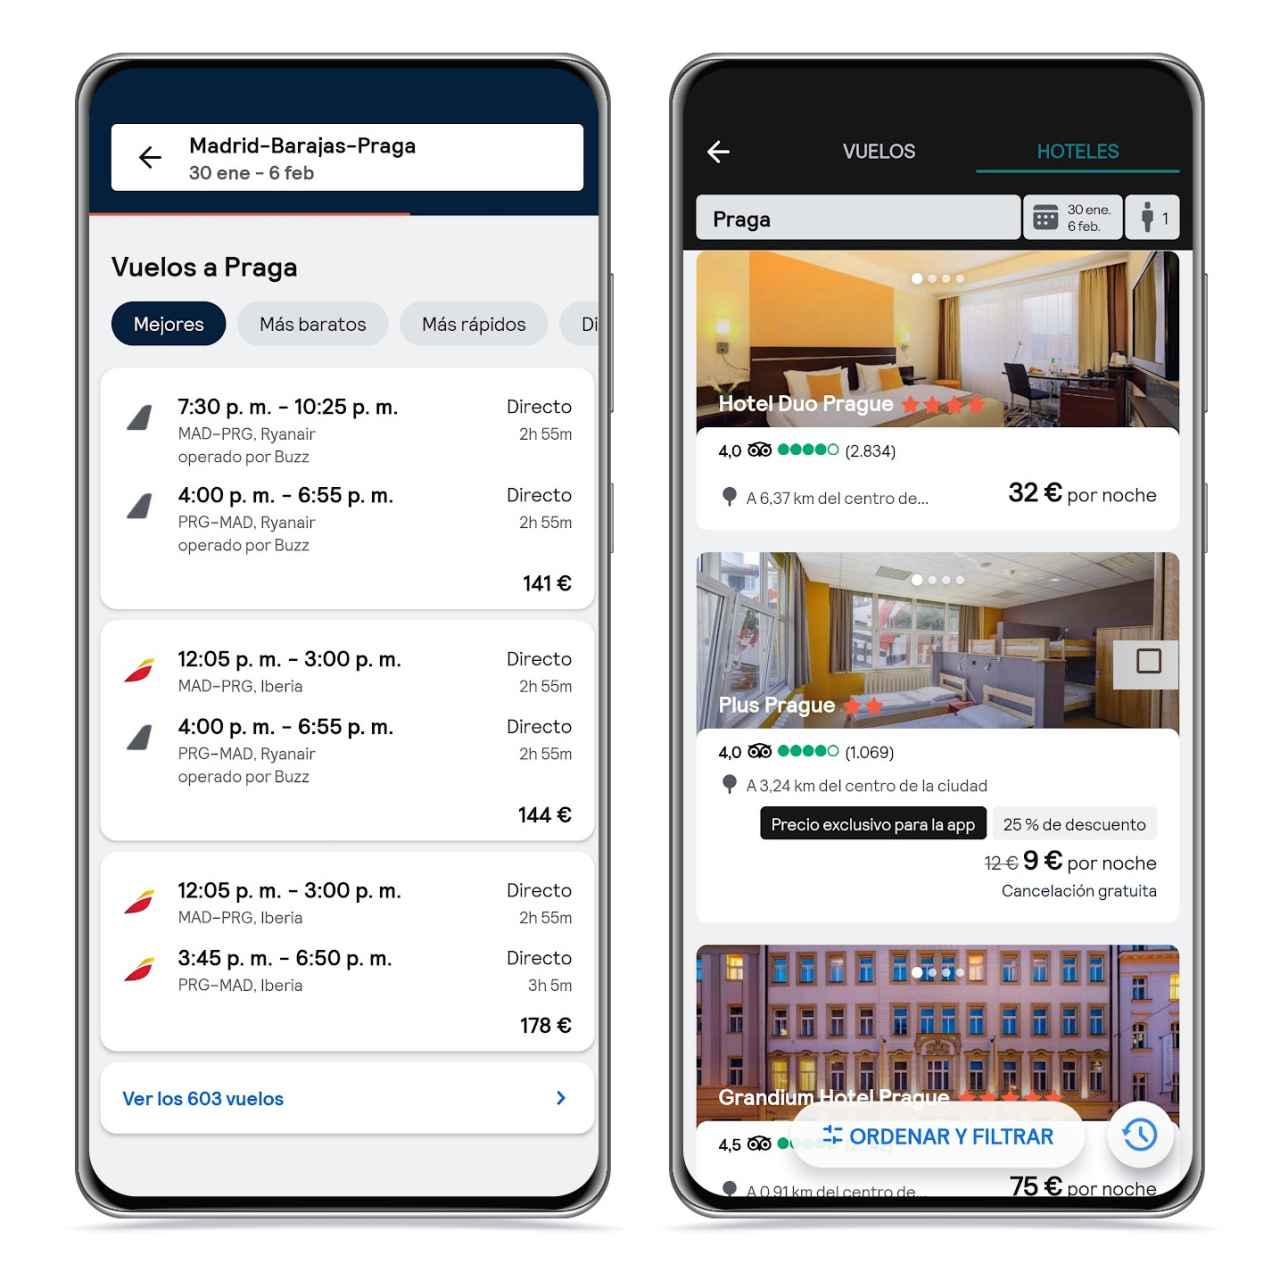 Flights and hotels on SkyScanner